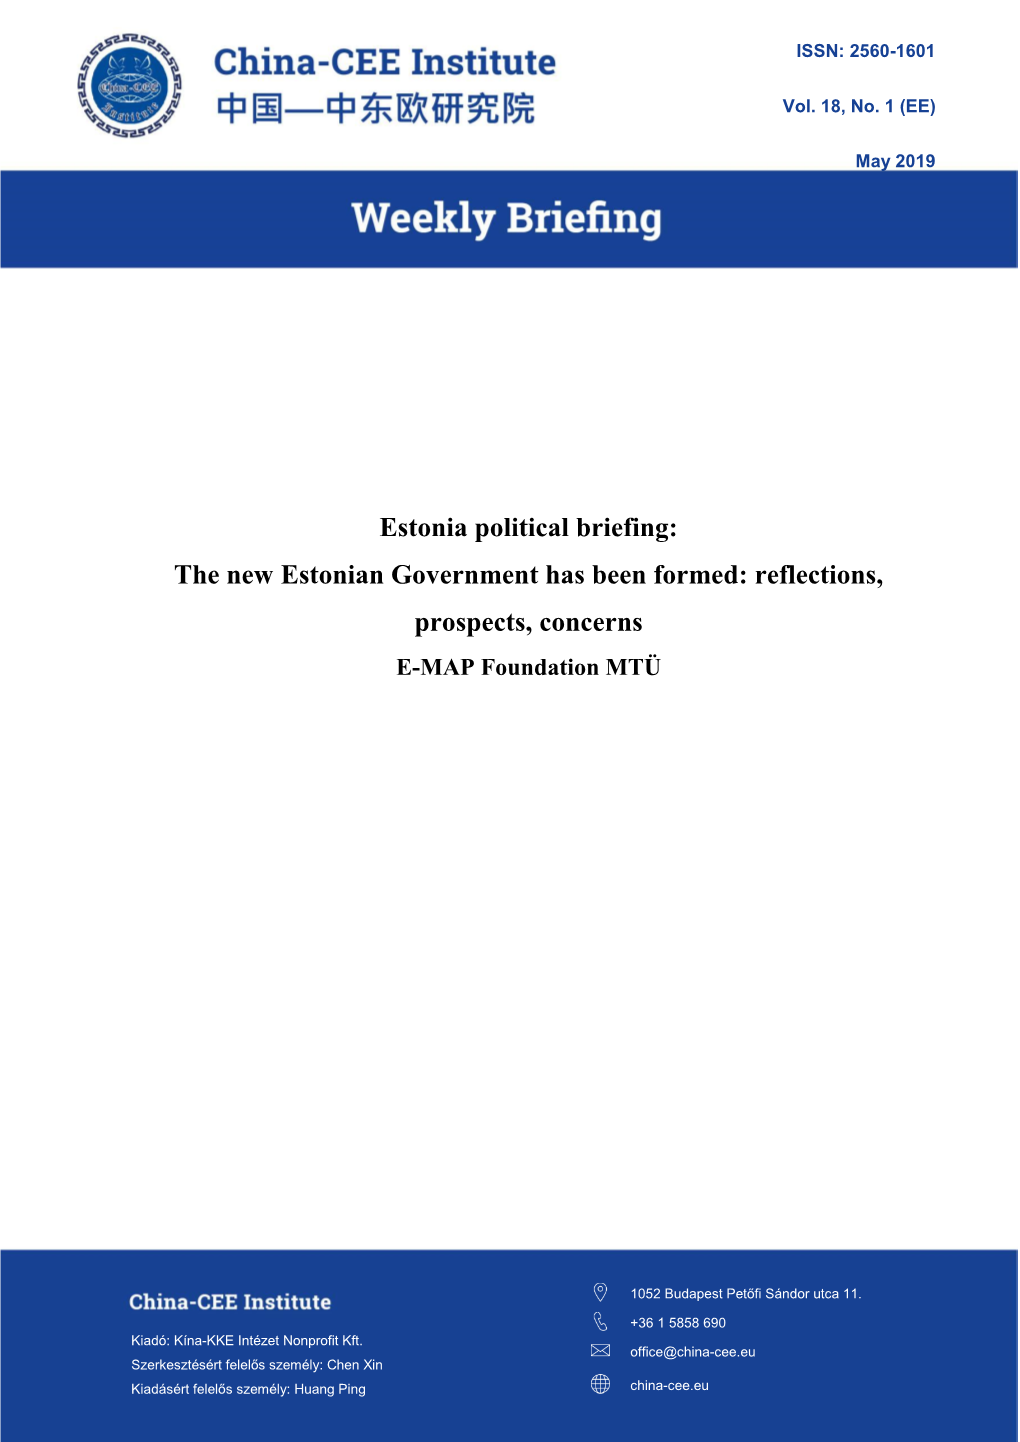 Estonia Political Briefing: the New Estonian Government Has Been Formed: Reflections, Prospects, Concerns E-MAP Foundation MTÜ